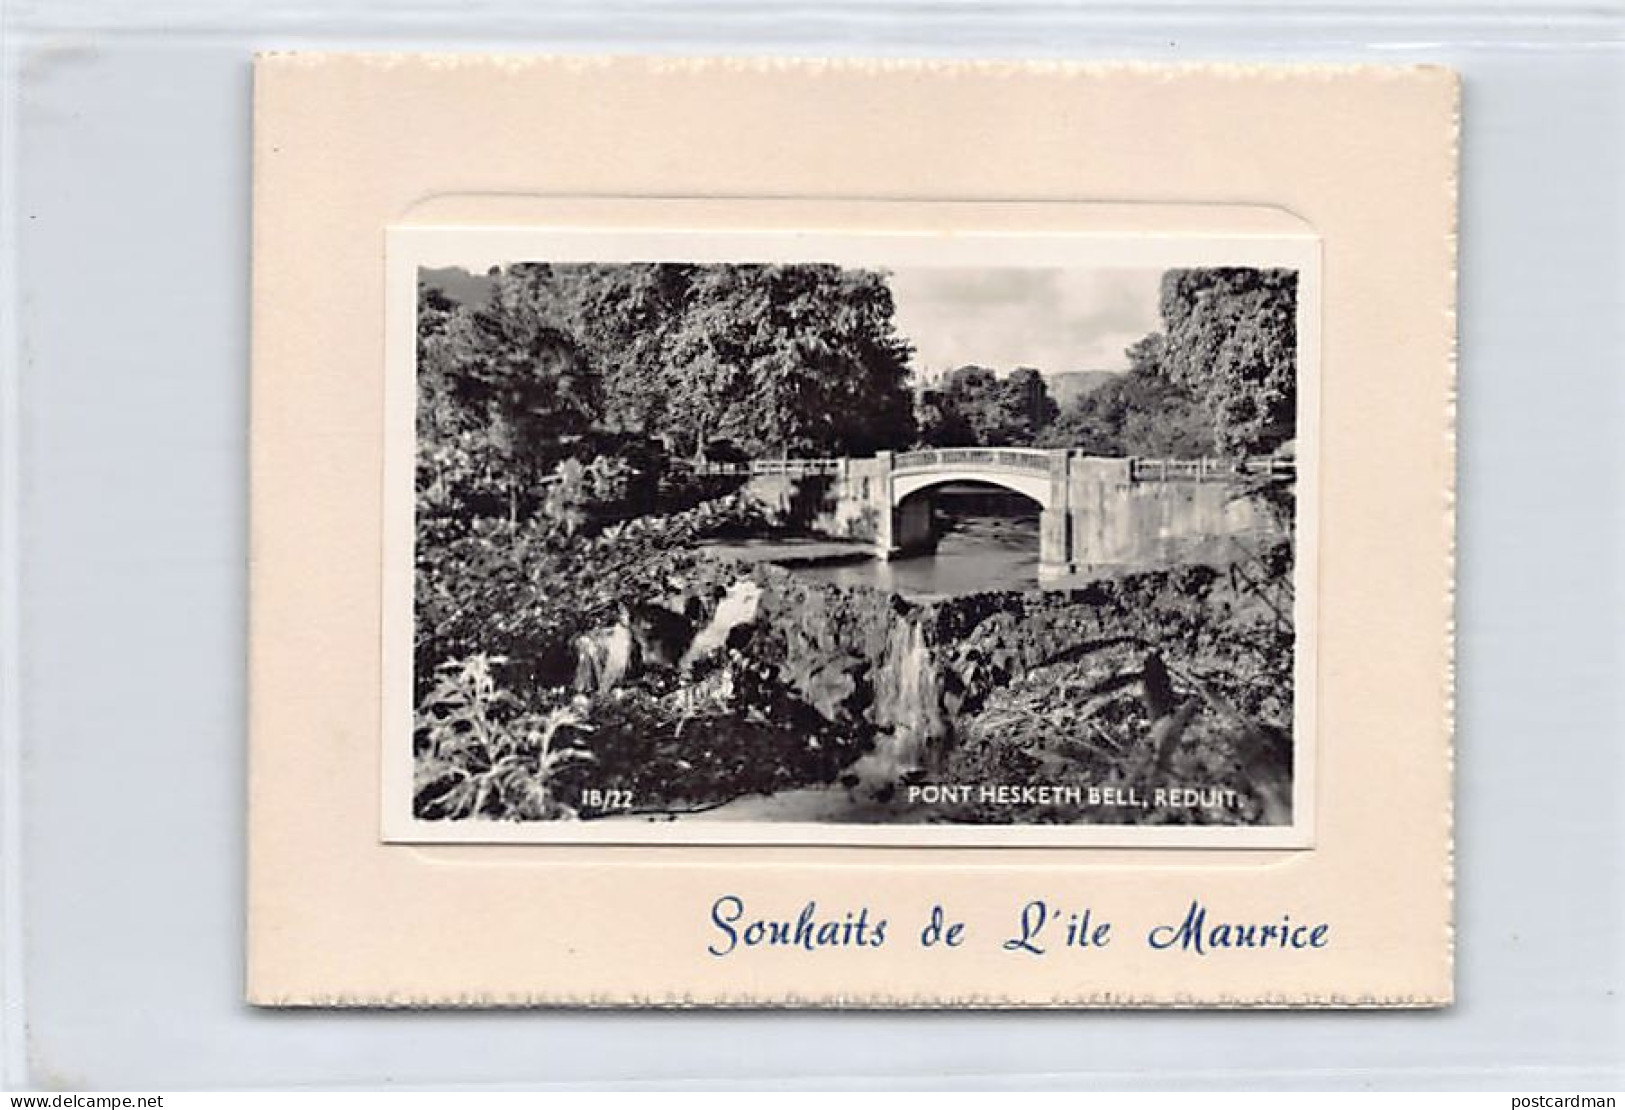 Mauritius - Pont Hesketh, Réduit - Xmas And New Year Card - Publ. Unknown  - Maurice